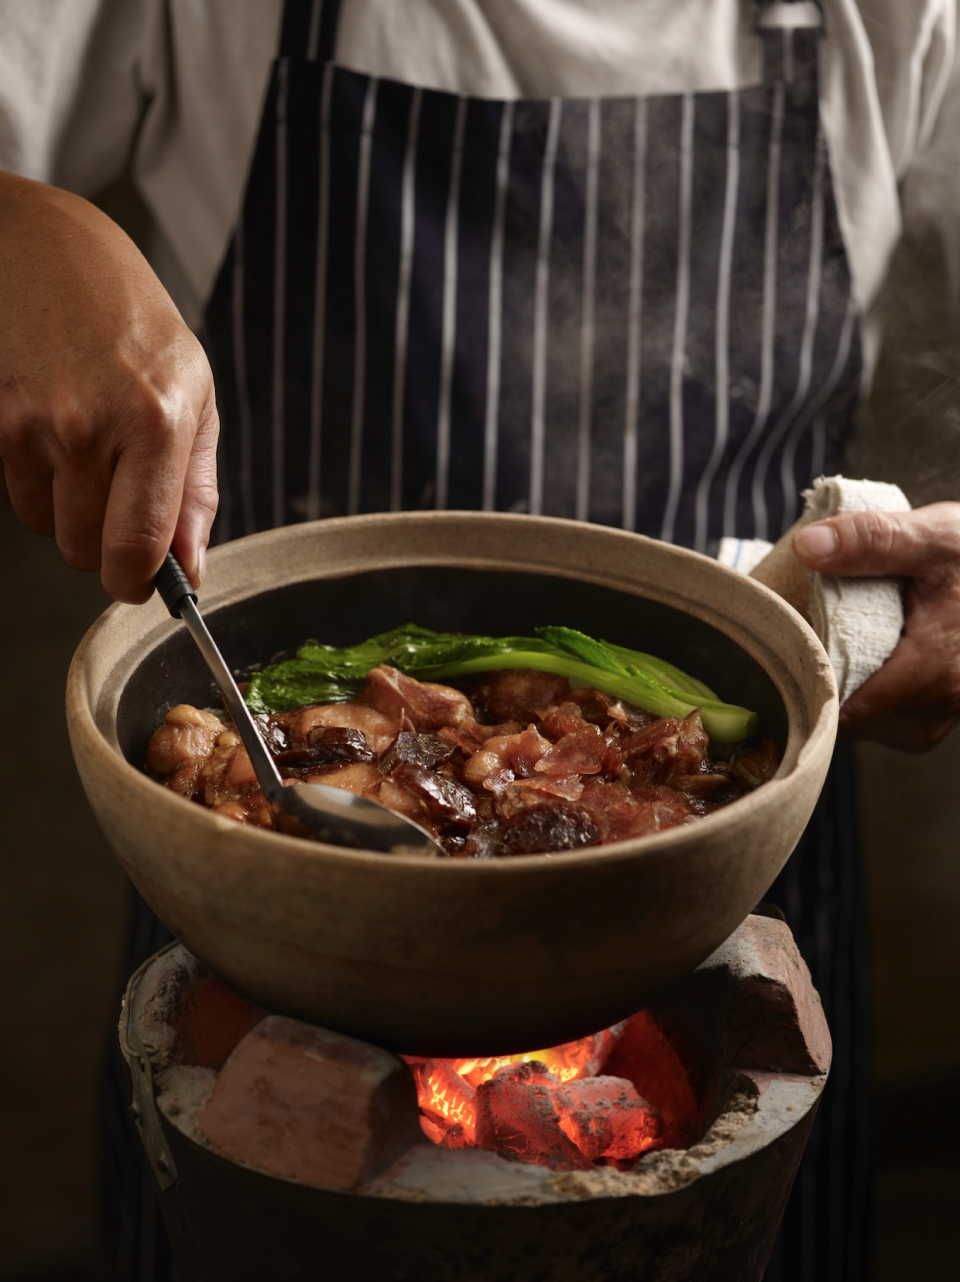 Geylang Claypot Rice earned a Michelin Plate in 2016, serving traditional Southeast Asian rice dishes slowly cooked in traditional claypots with savory ingredients.